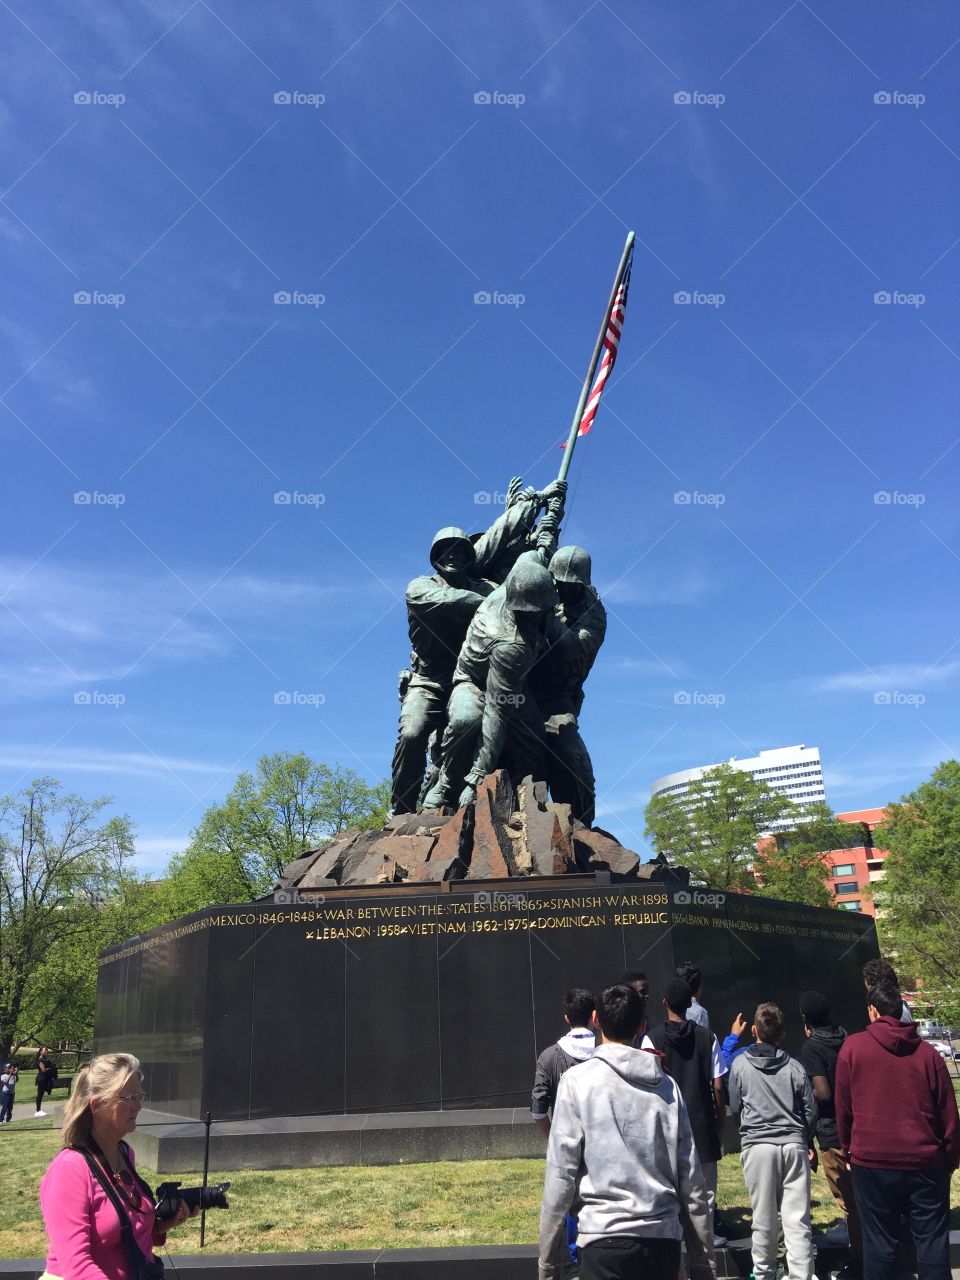 Statue in Washington DC depicting soldiers in WWII.